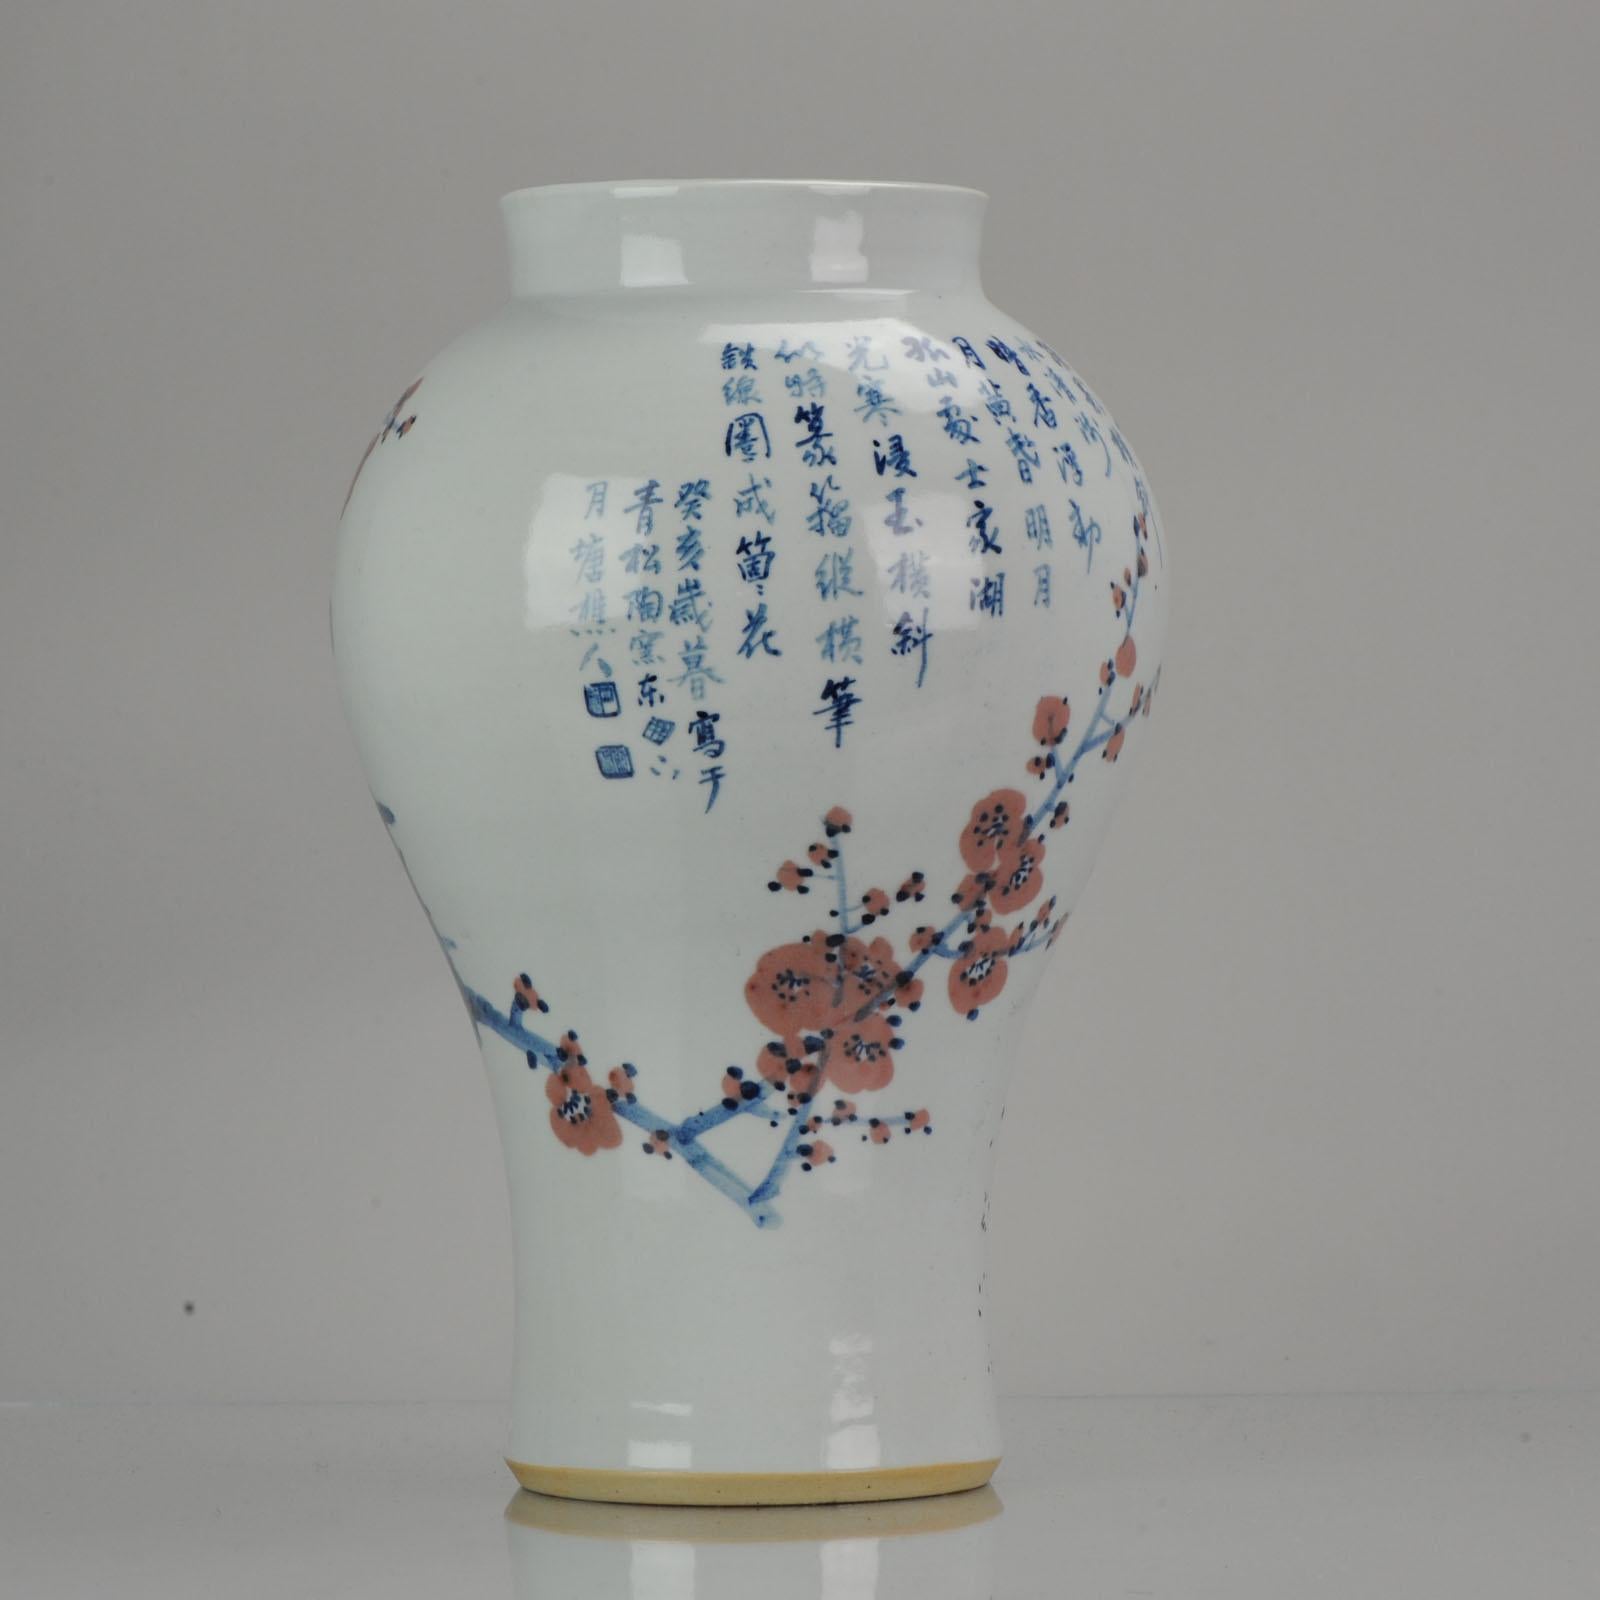 A very nicely decorated vase with a scene of flowers and prunus blossom and calligraphy.

Condition
Overall condition perfect. Size 325mm.

Period
20th century PRoC (1949-now).
  